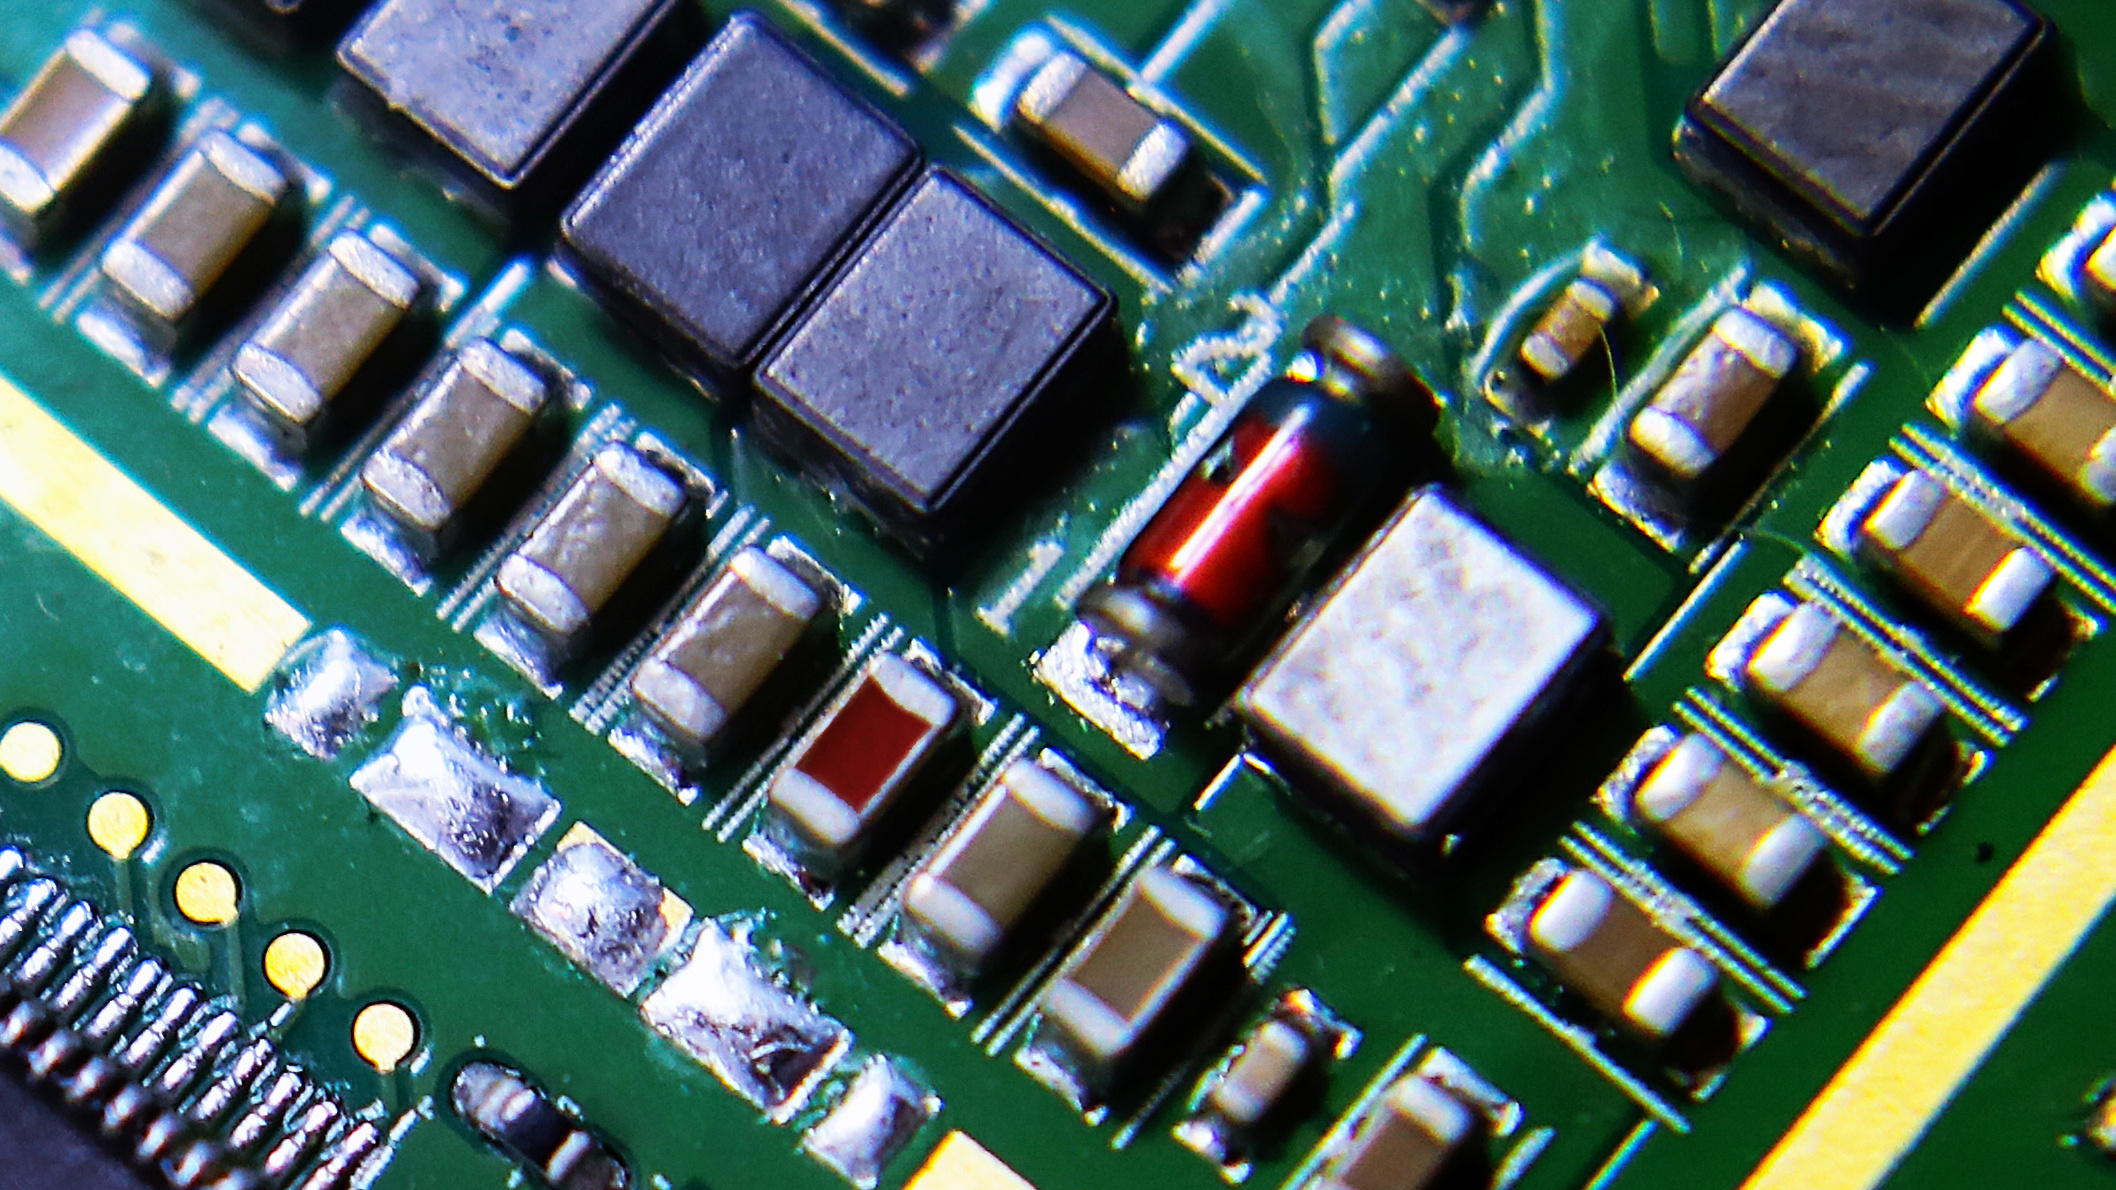 Malicious Component Found On Server Motherboards Supplied To